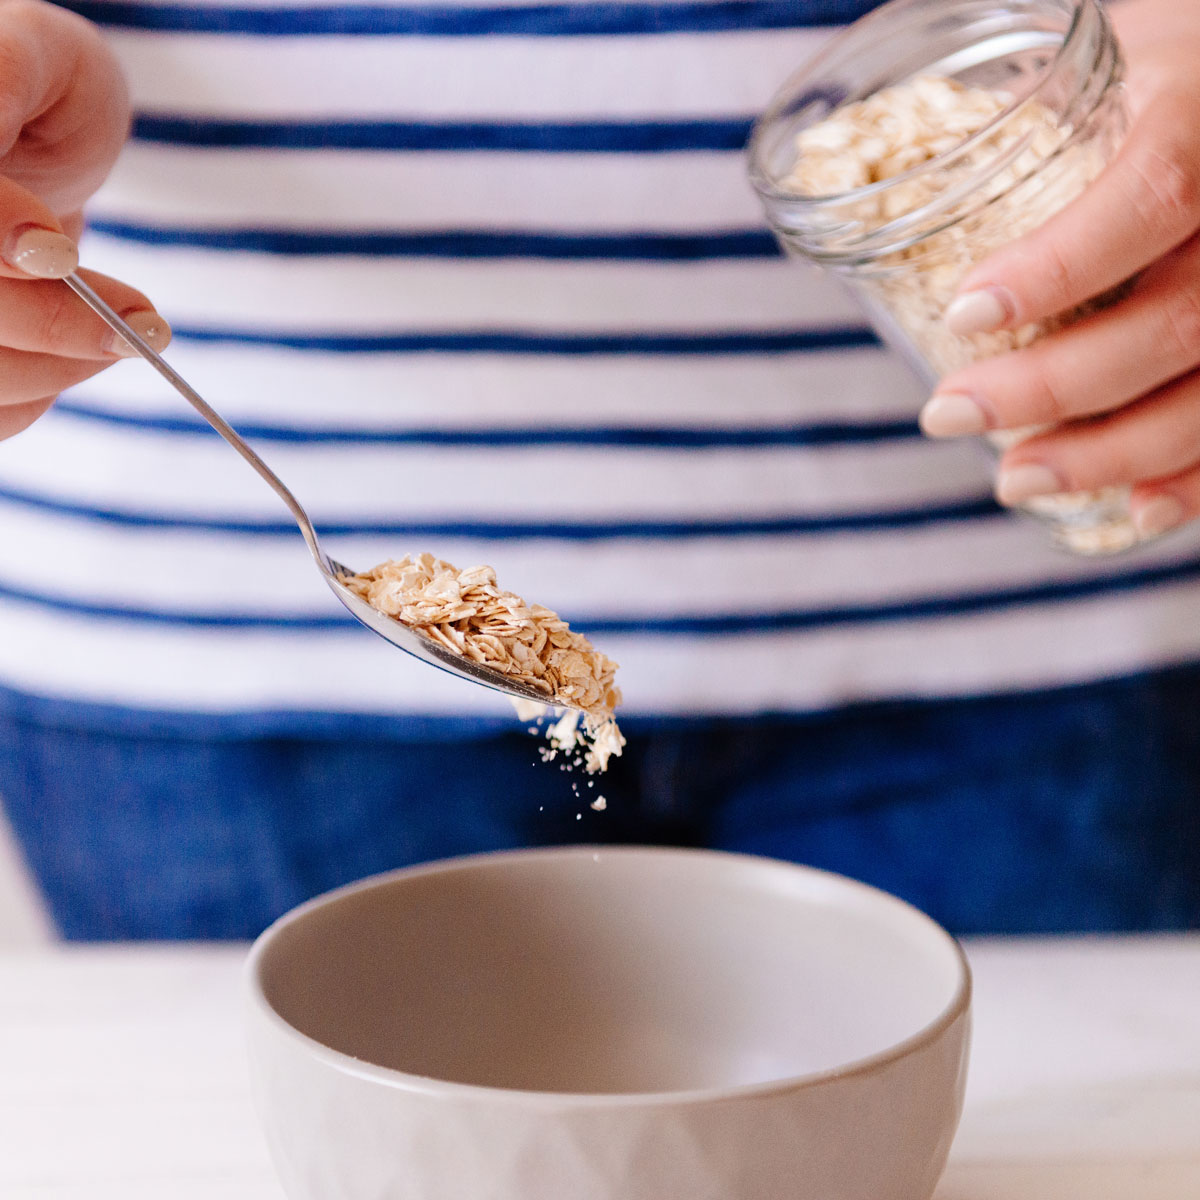 4 Reasons You Should Eat Whole Grains Every Day